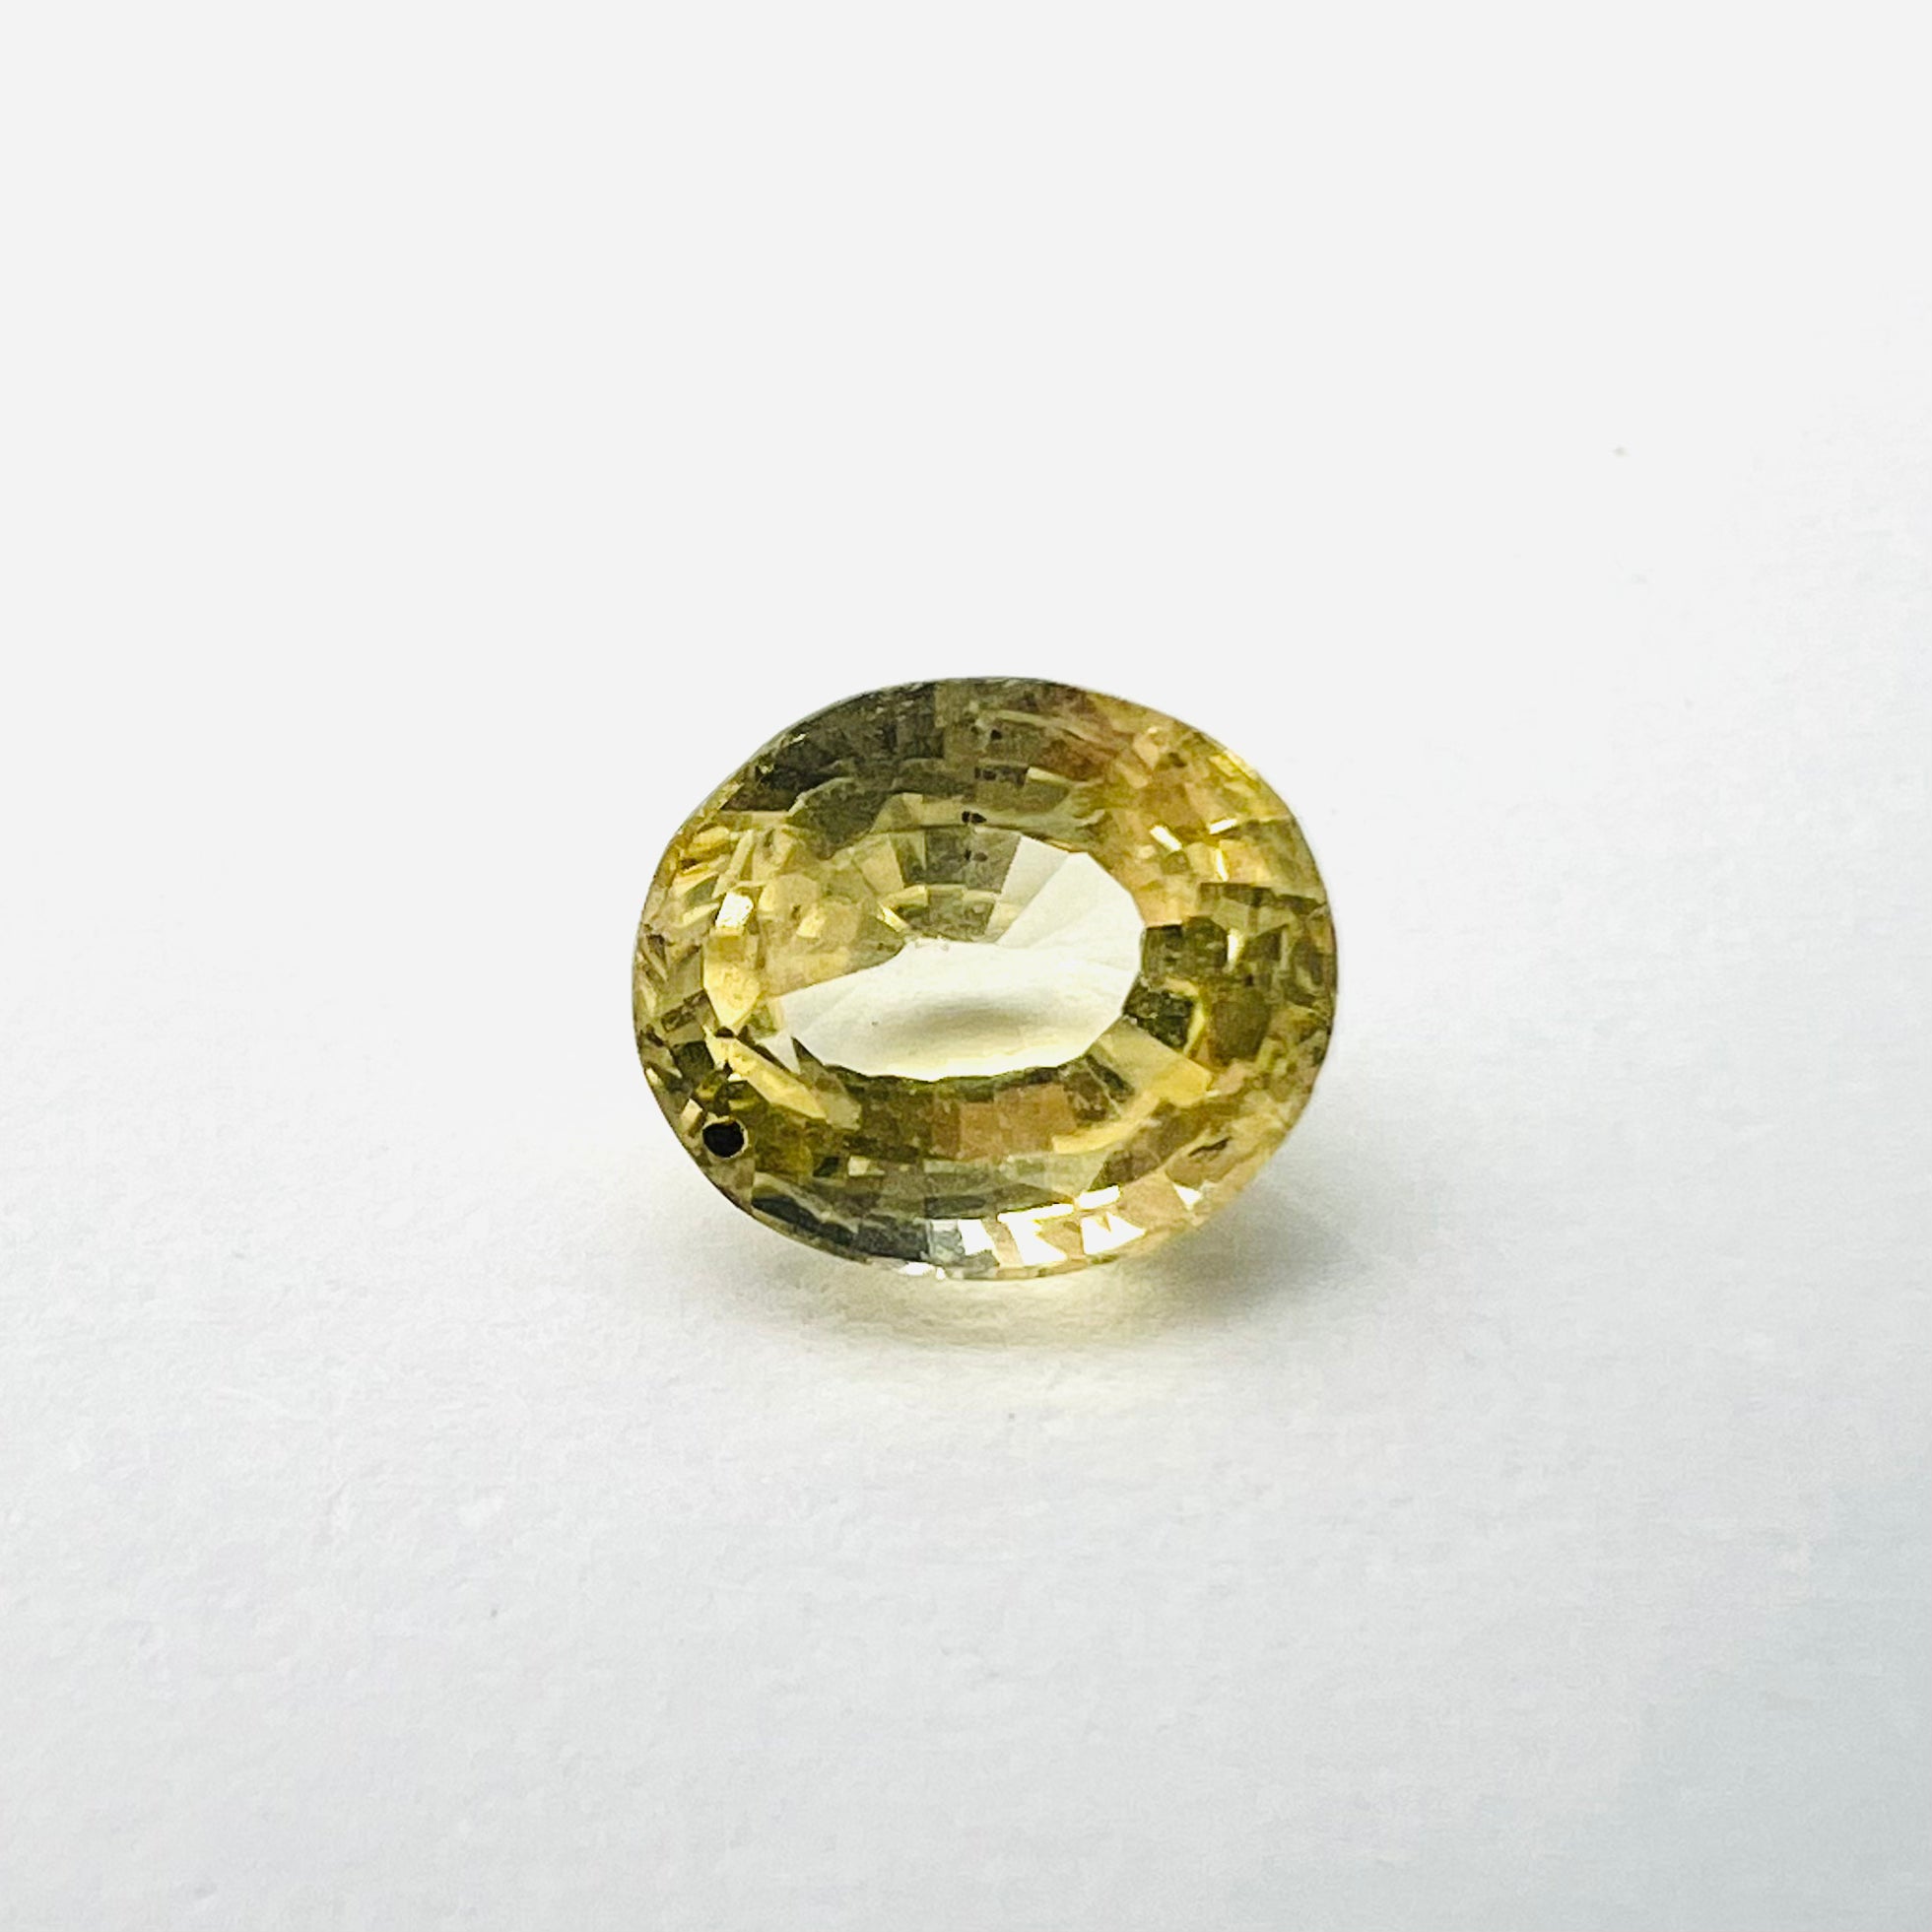 .94CTW Loose Oval Yellow Sapphire 5.6x4.9x3.8mm Earth mined Gemstone